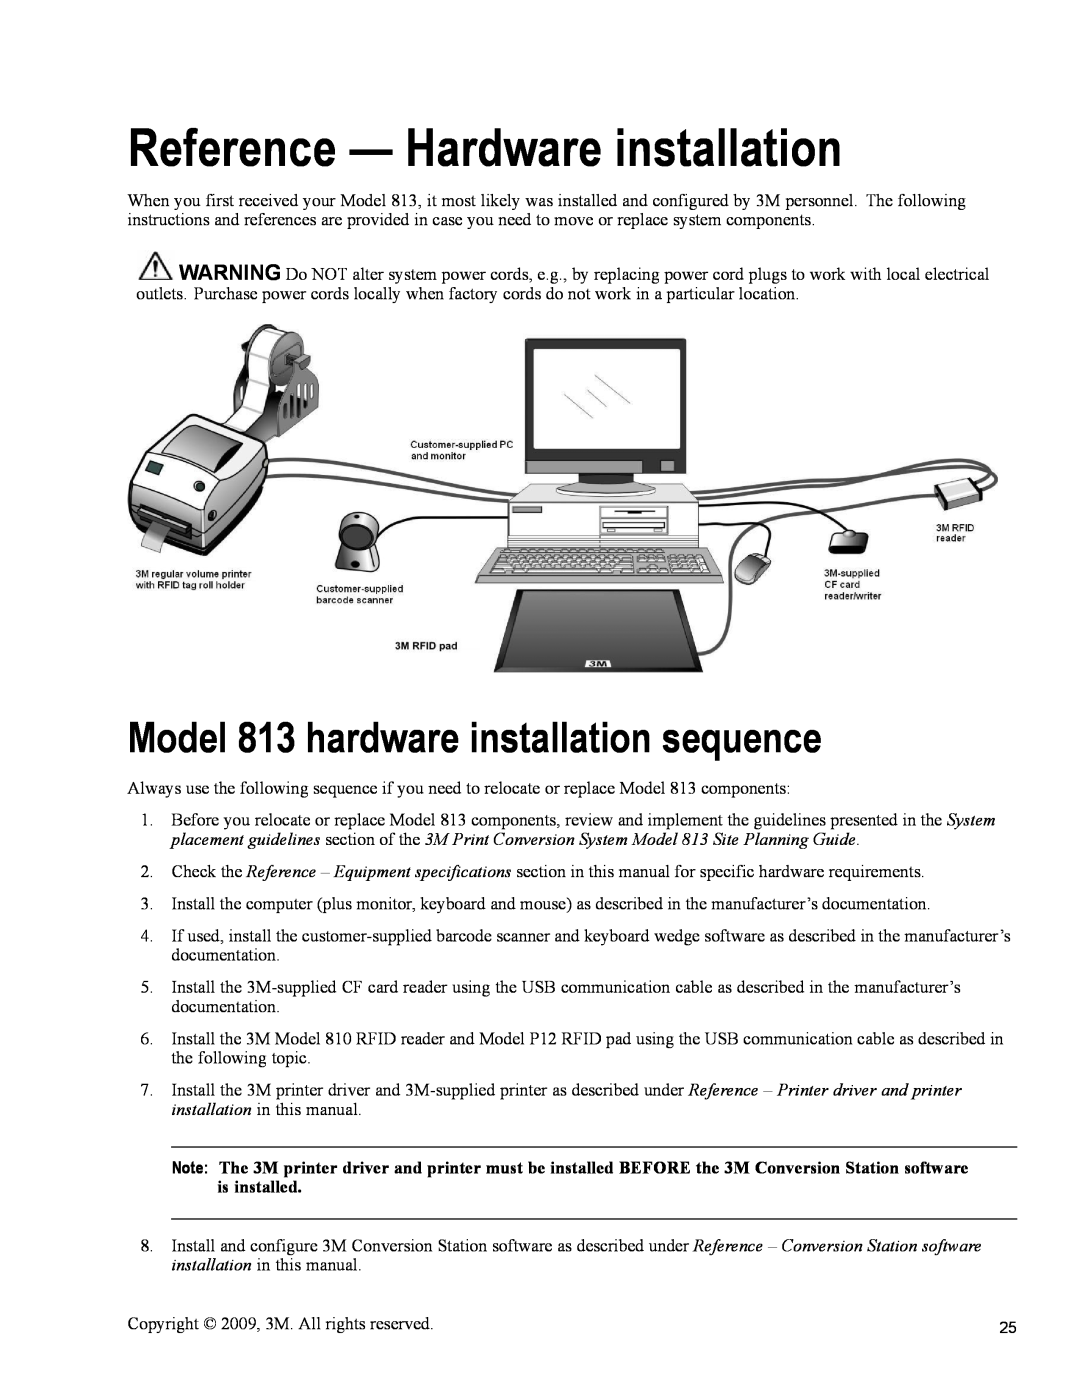 3M owner manual Reference - Hardware installation, Model 813 hardware installation sequence 